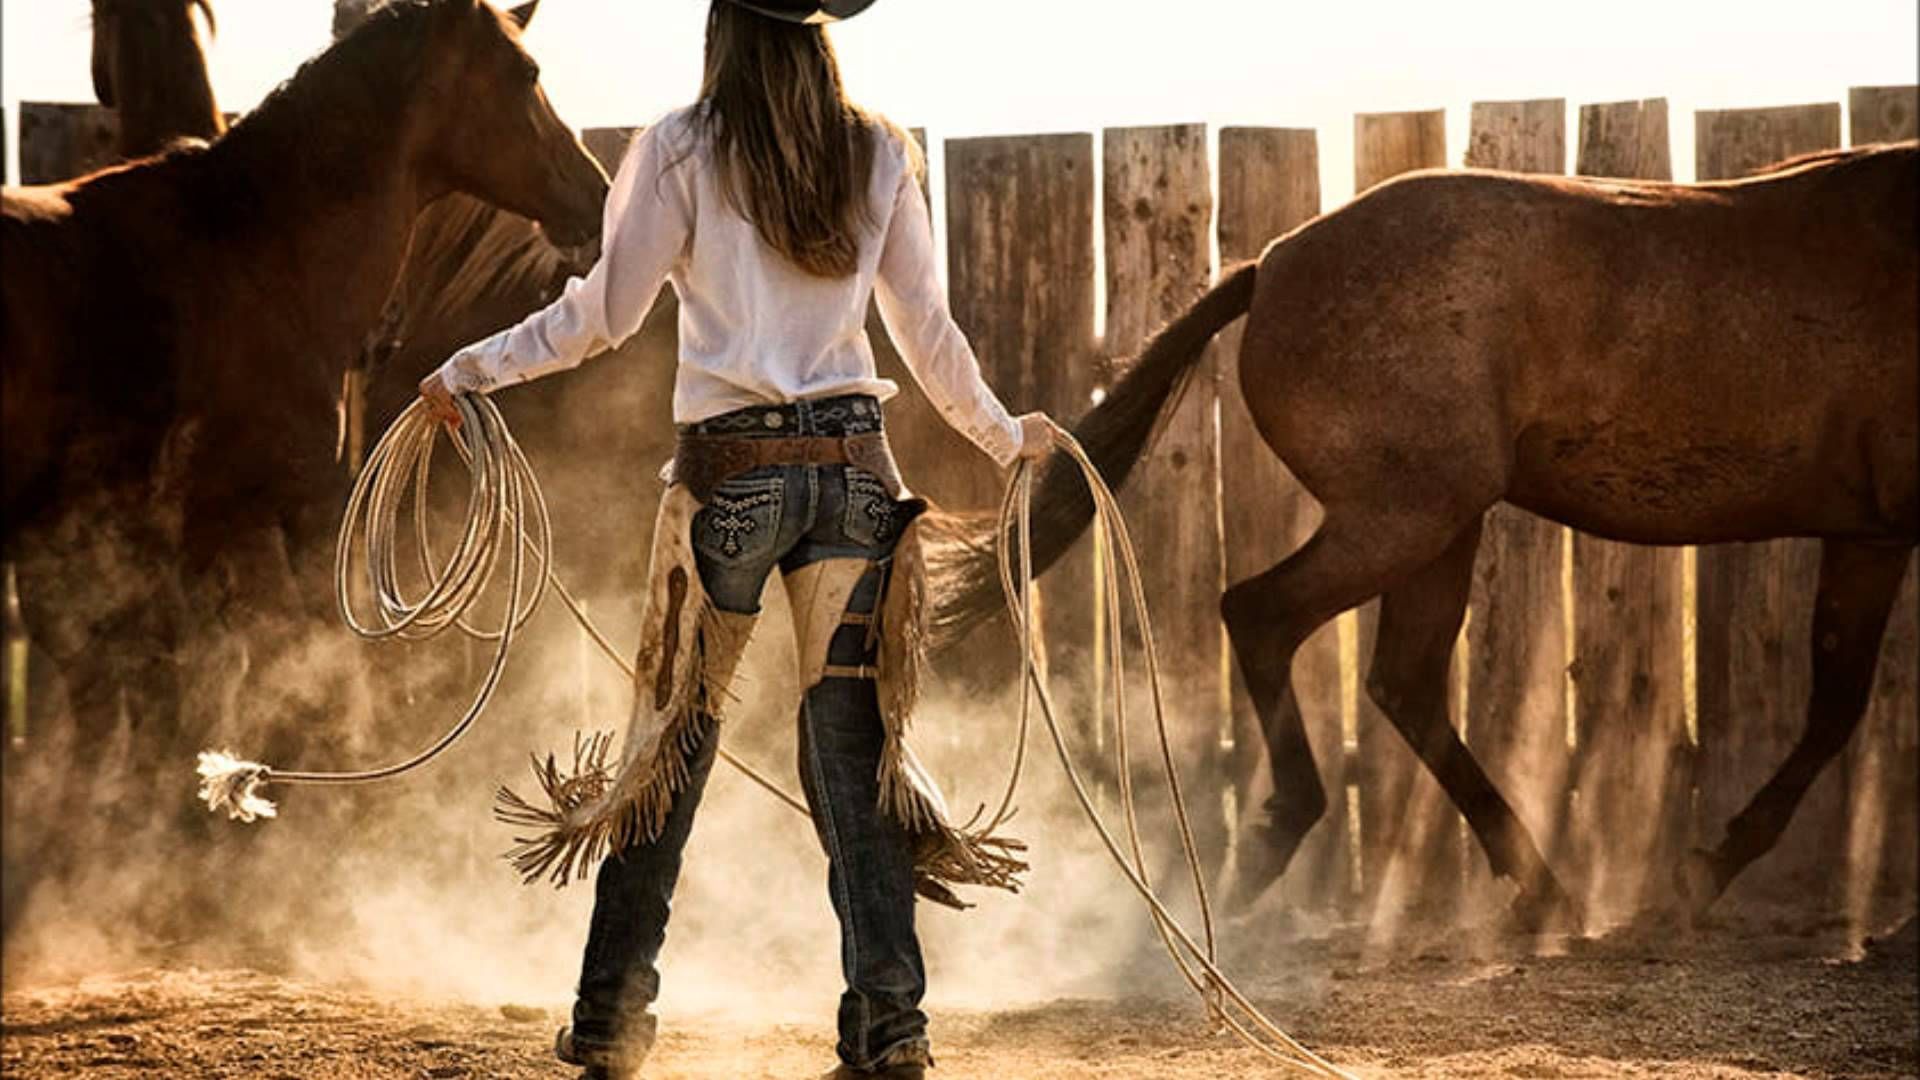 Free Cowgirl HD Wallpaper. Horses, Horse love, Cowgirl and horse